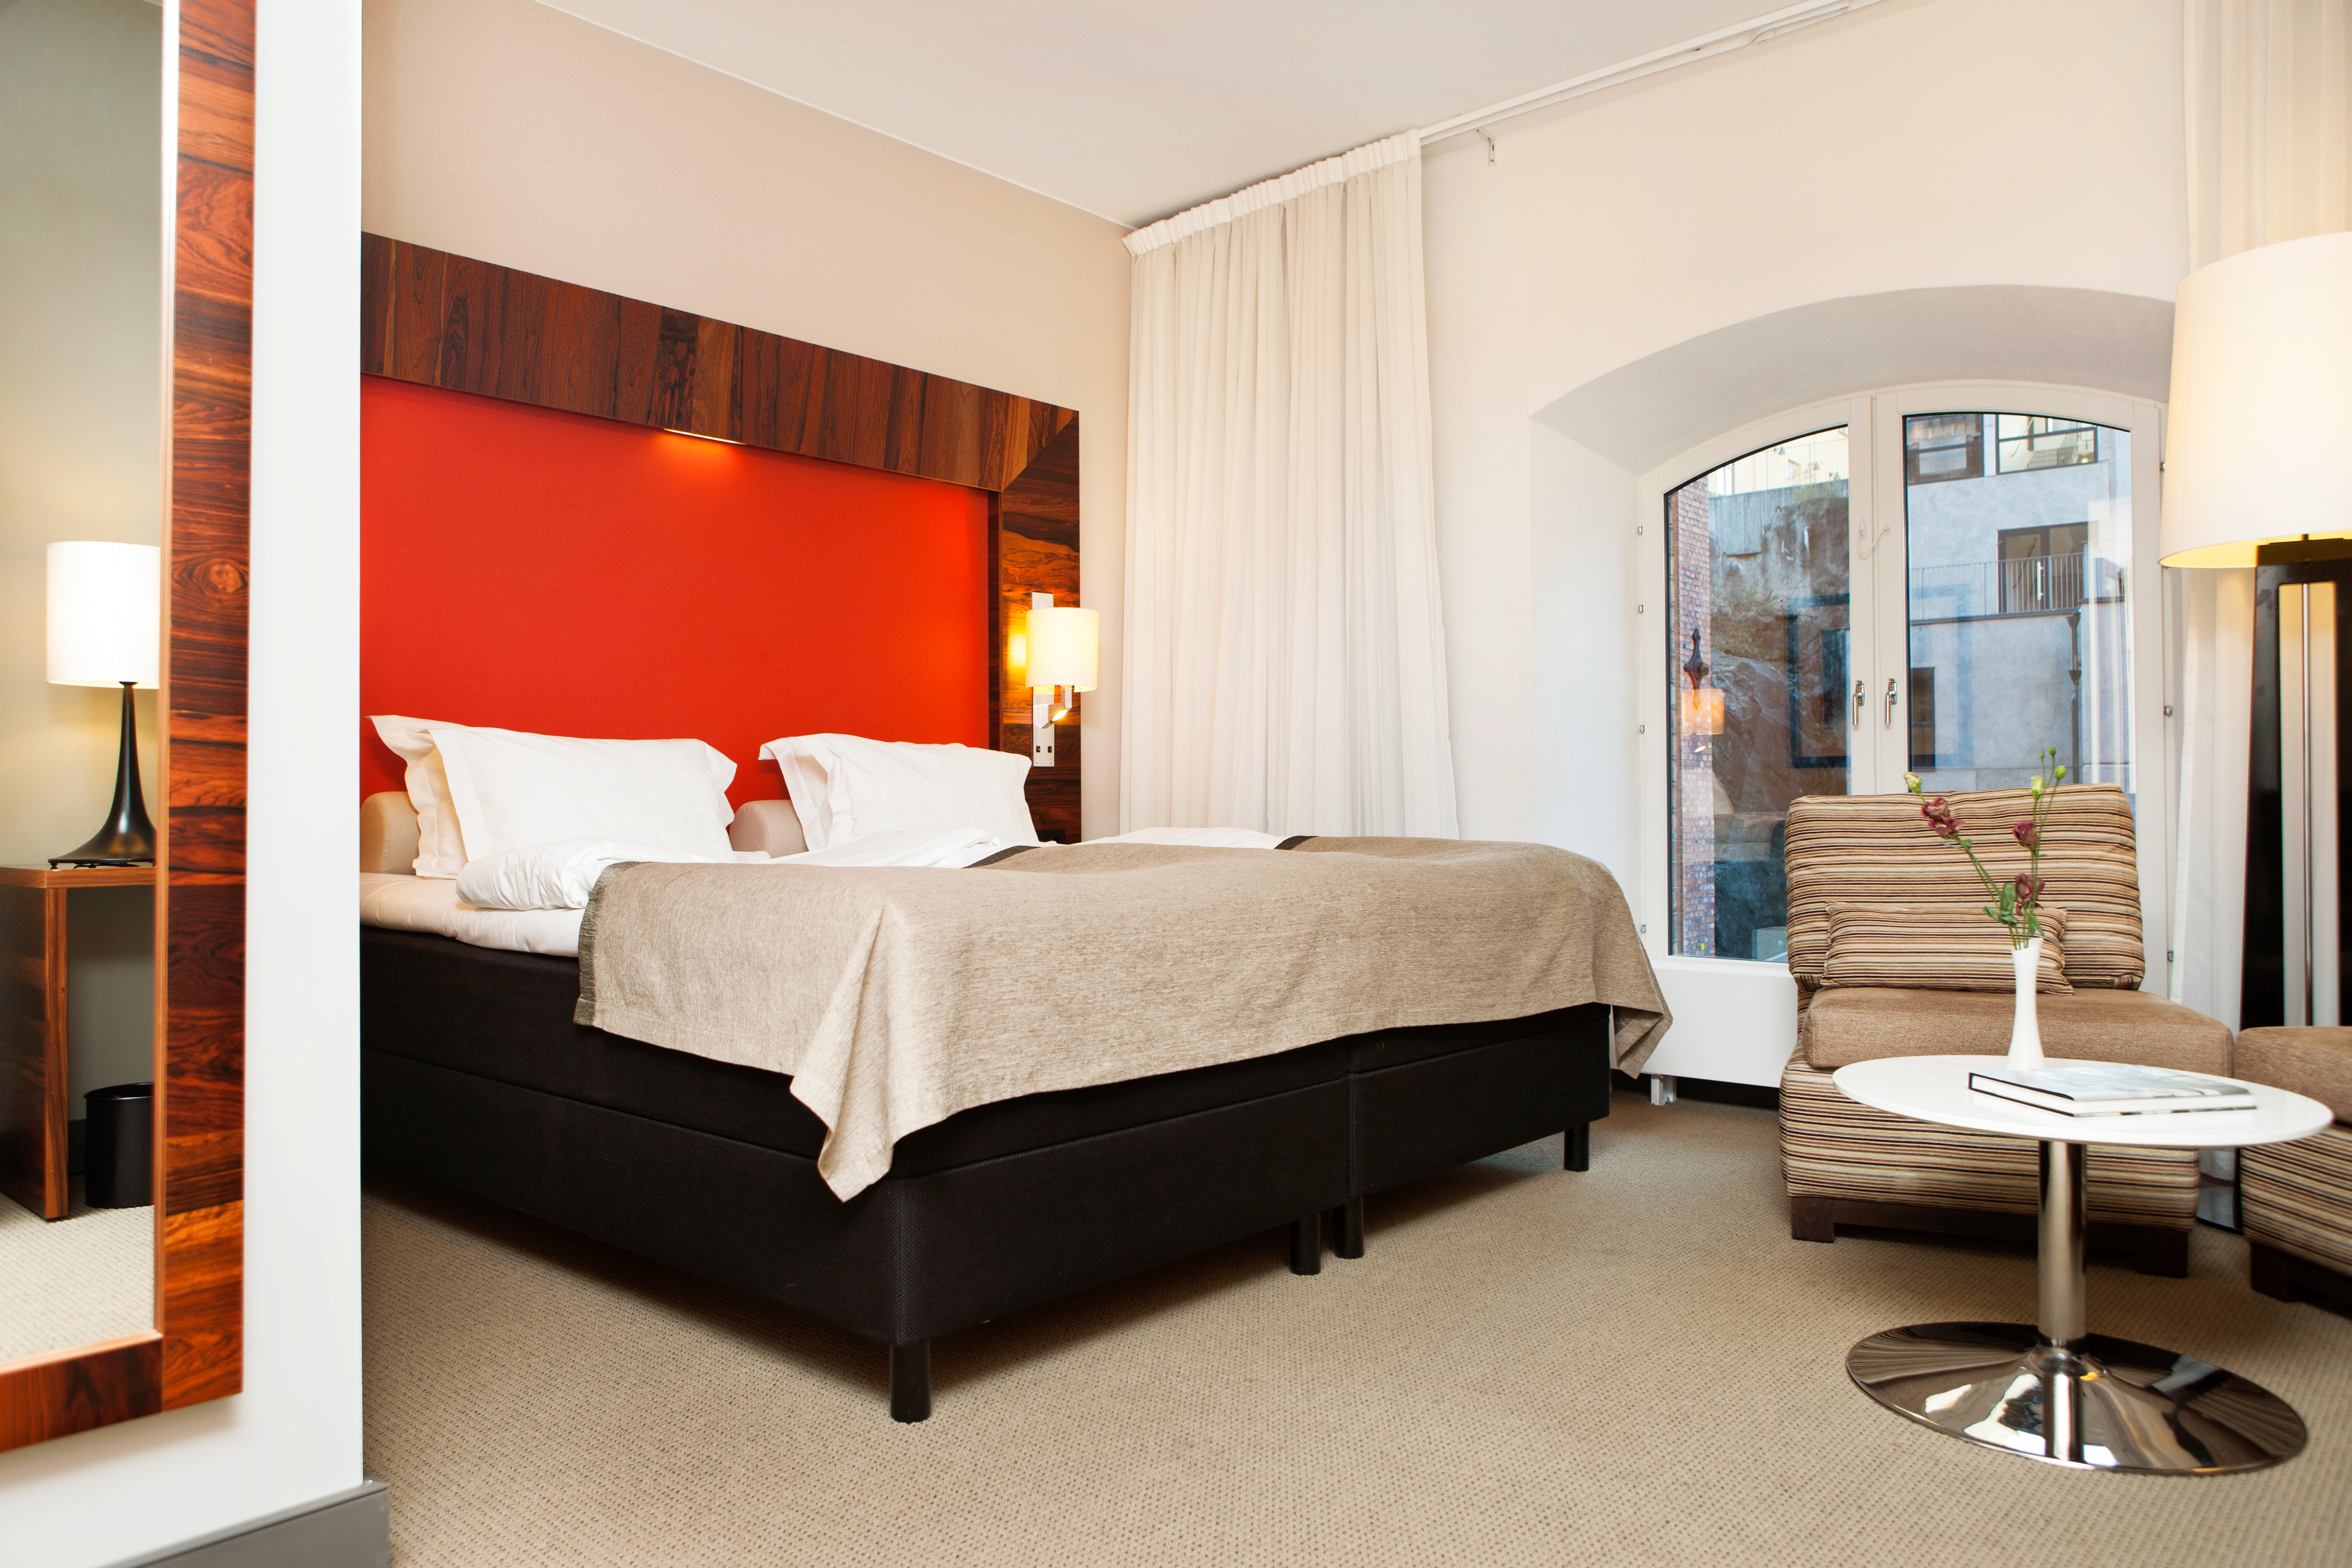 Bright hotel room with bed, red headboard and armchairs